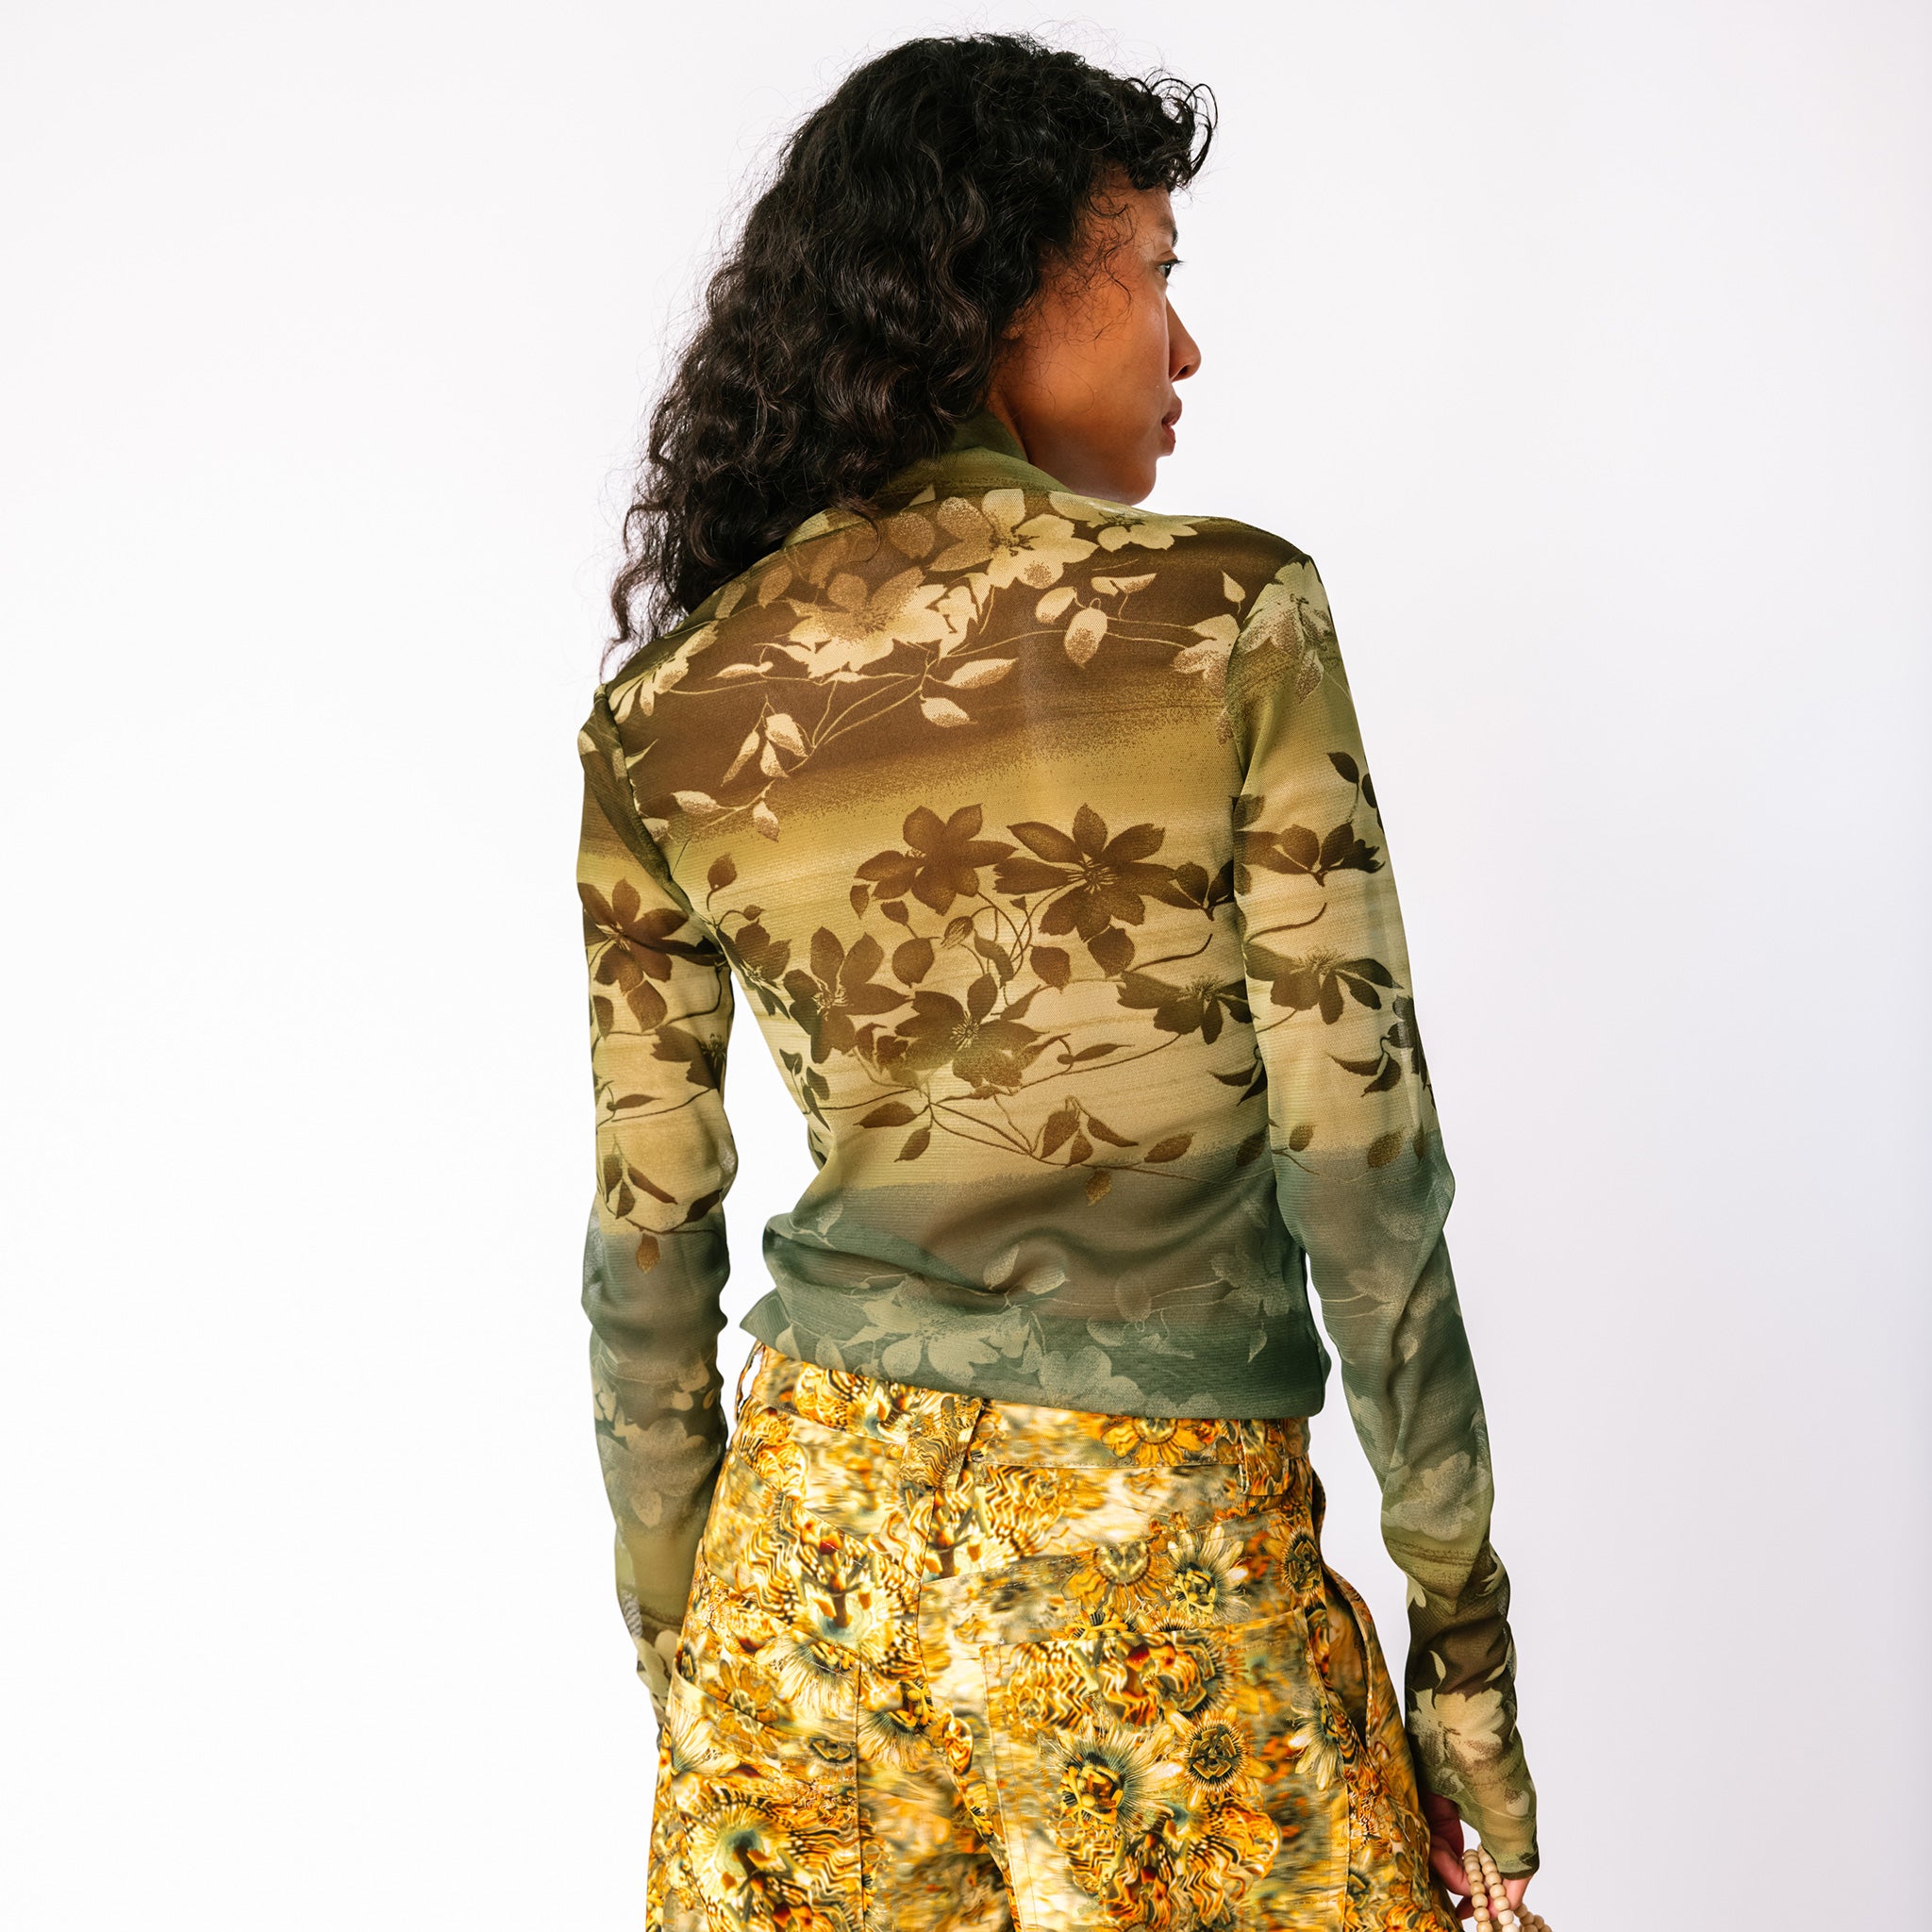 A model wears the long sleeved mesh Thumbtastic Top in an ombre green print with floral and leaves silhouettes - back view.